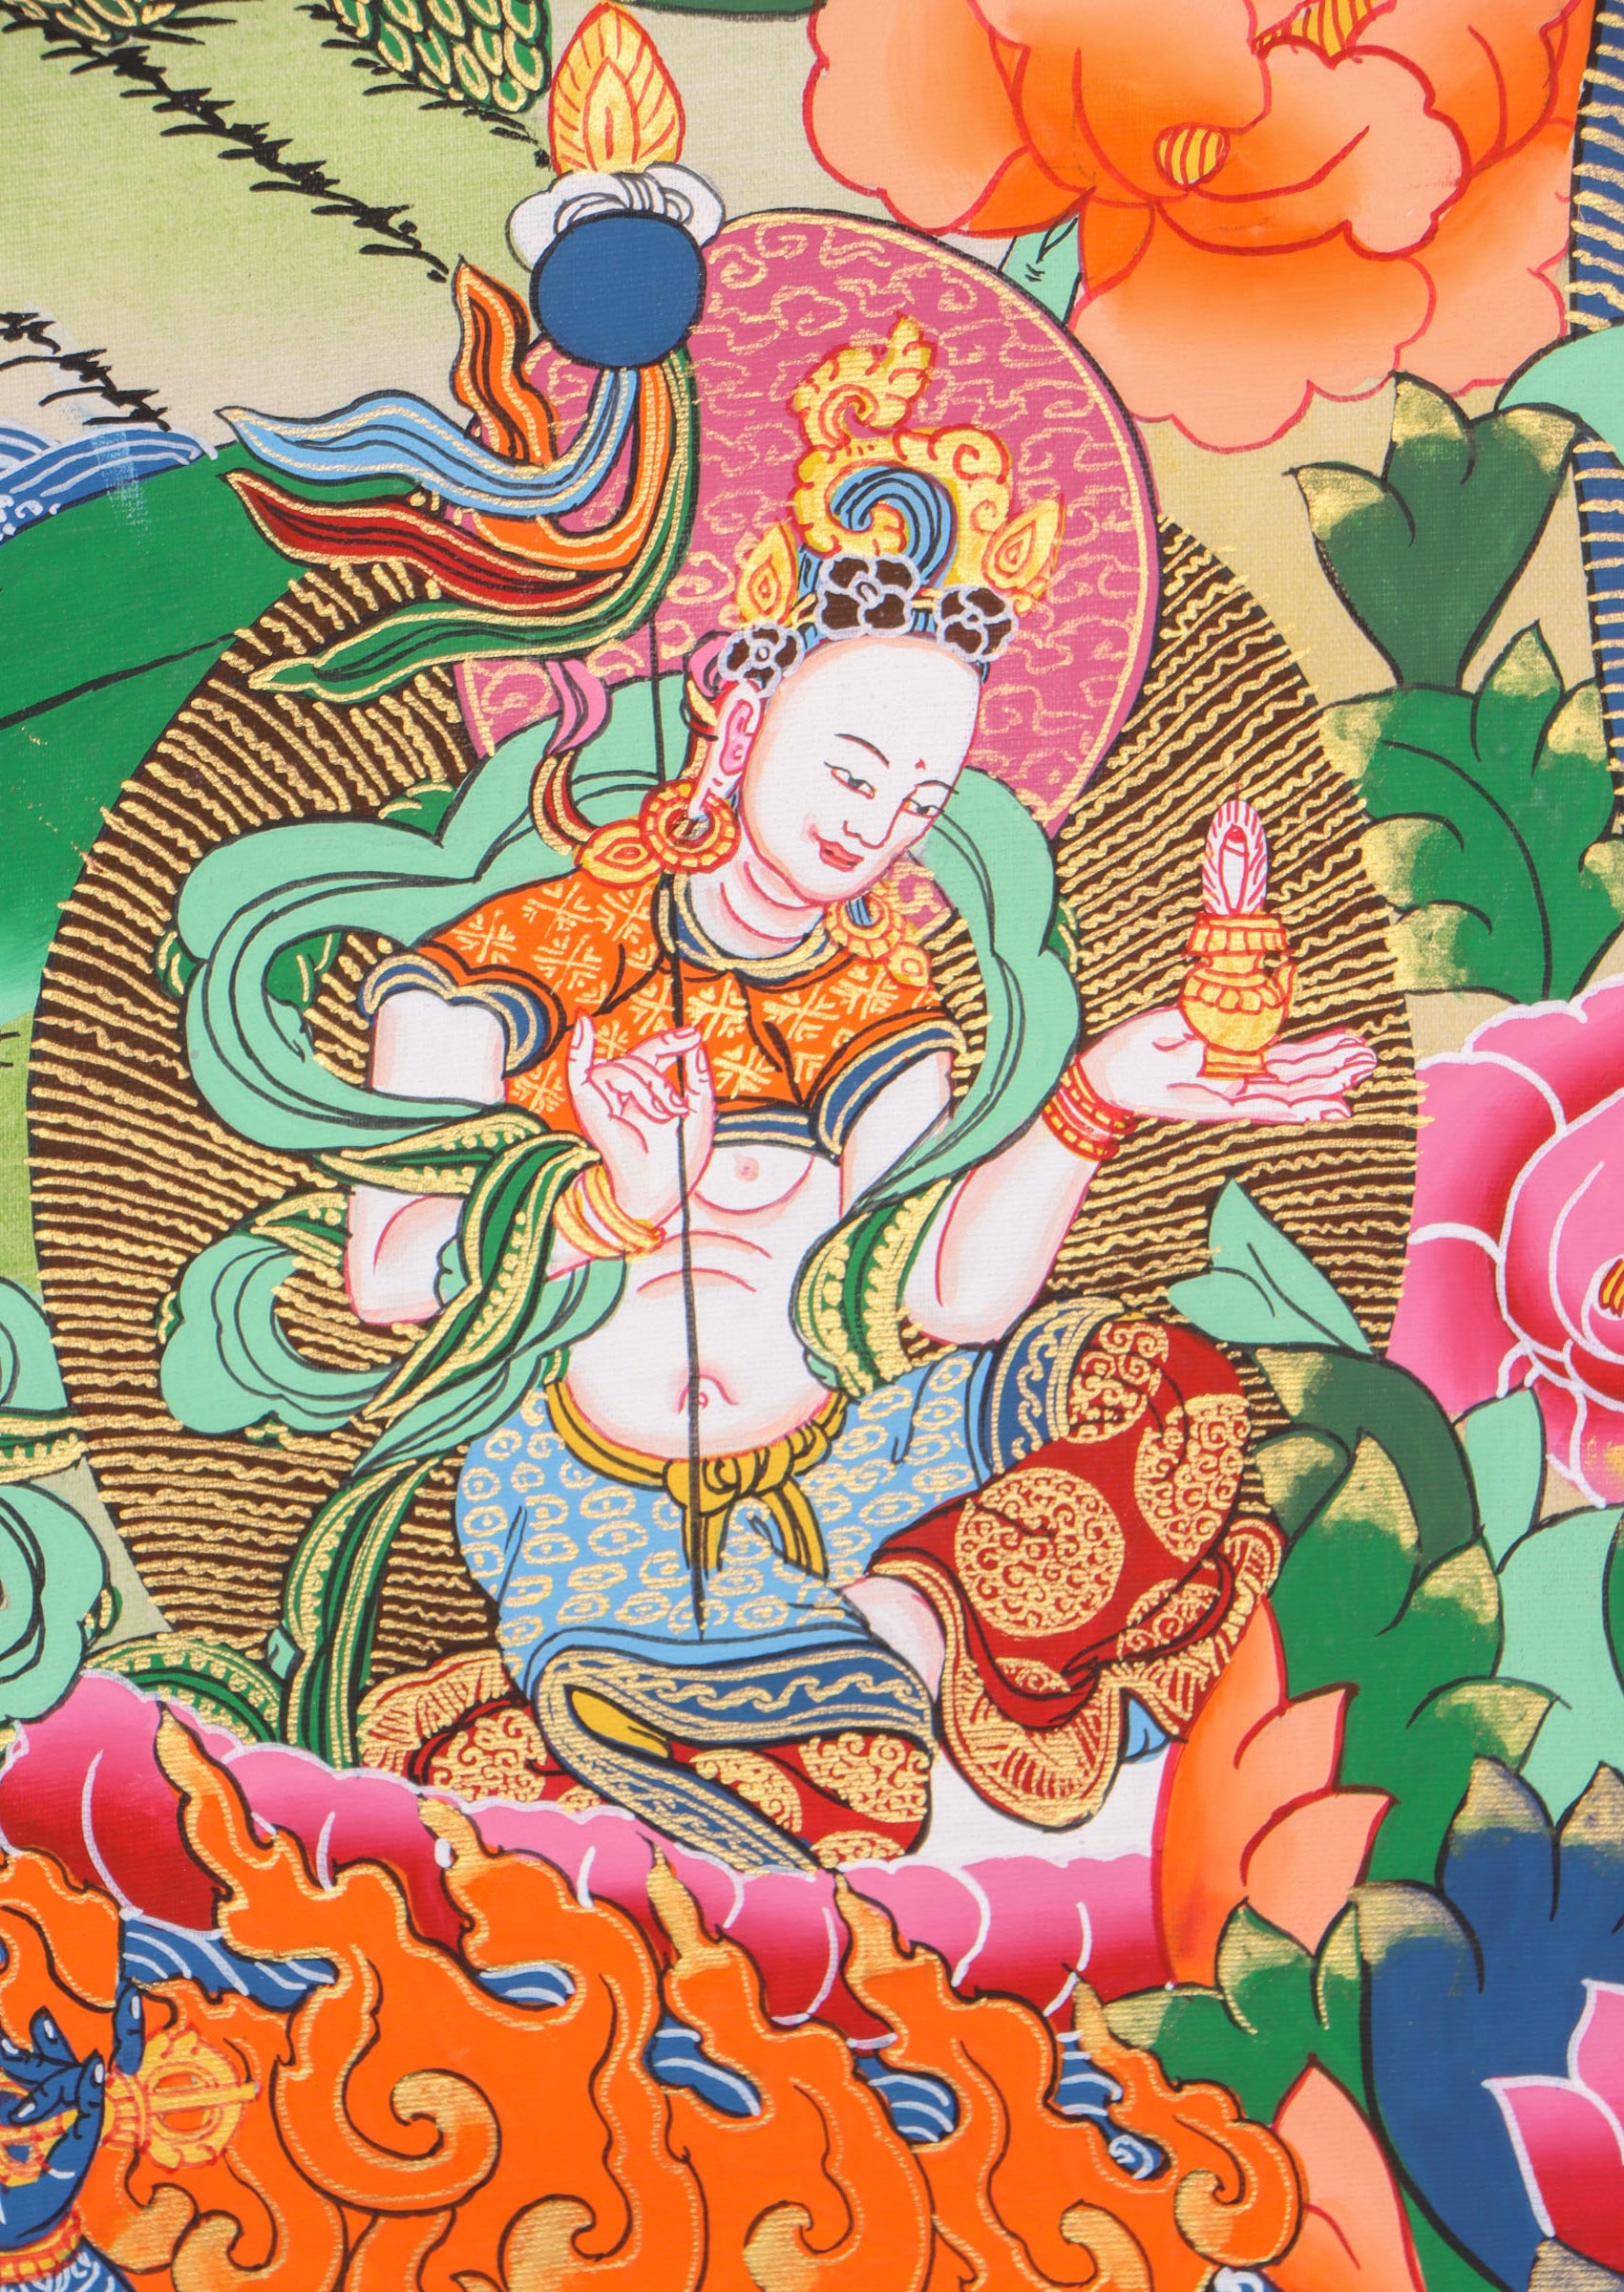 Guru Rinpoche Thangka serves as a tool for meditation, prayers, and personal growth.